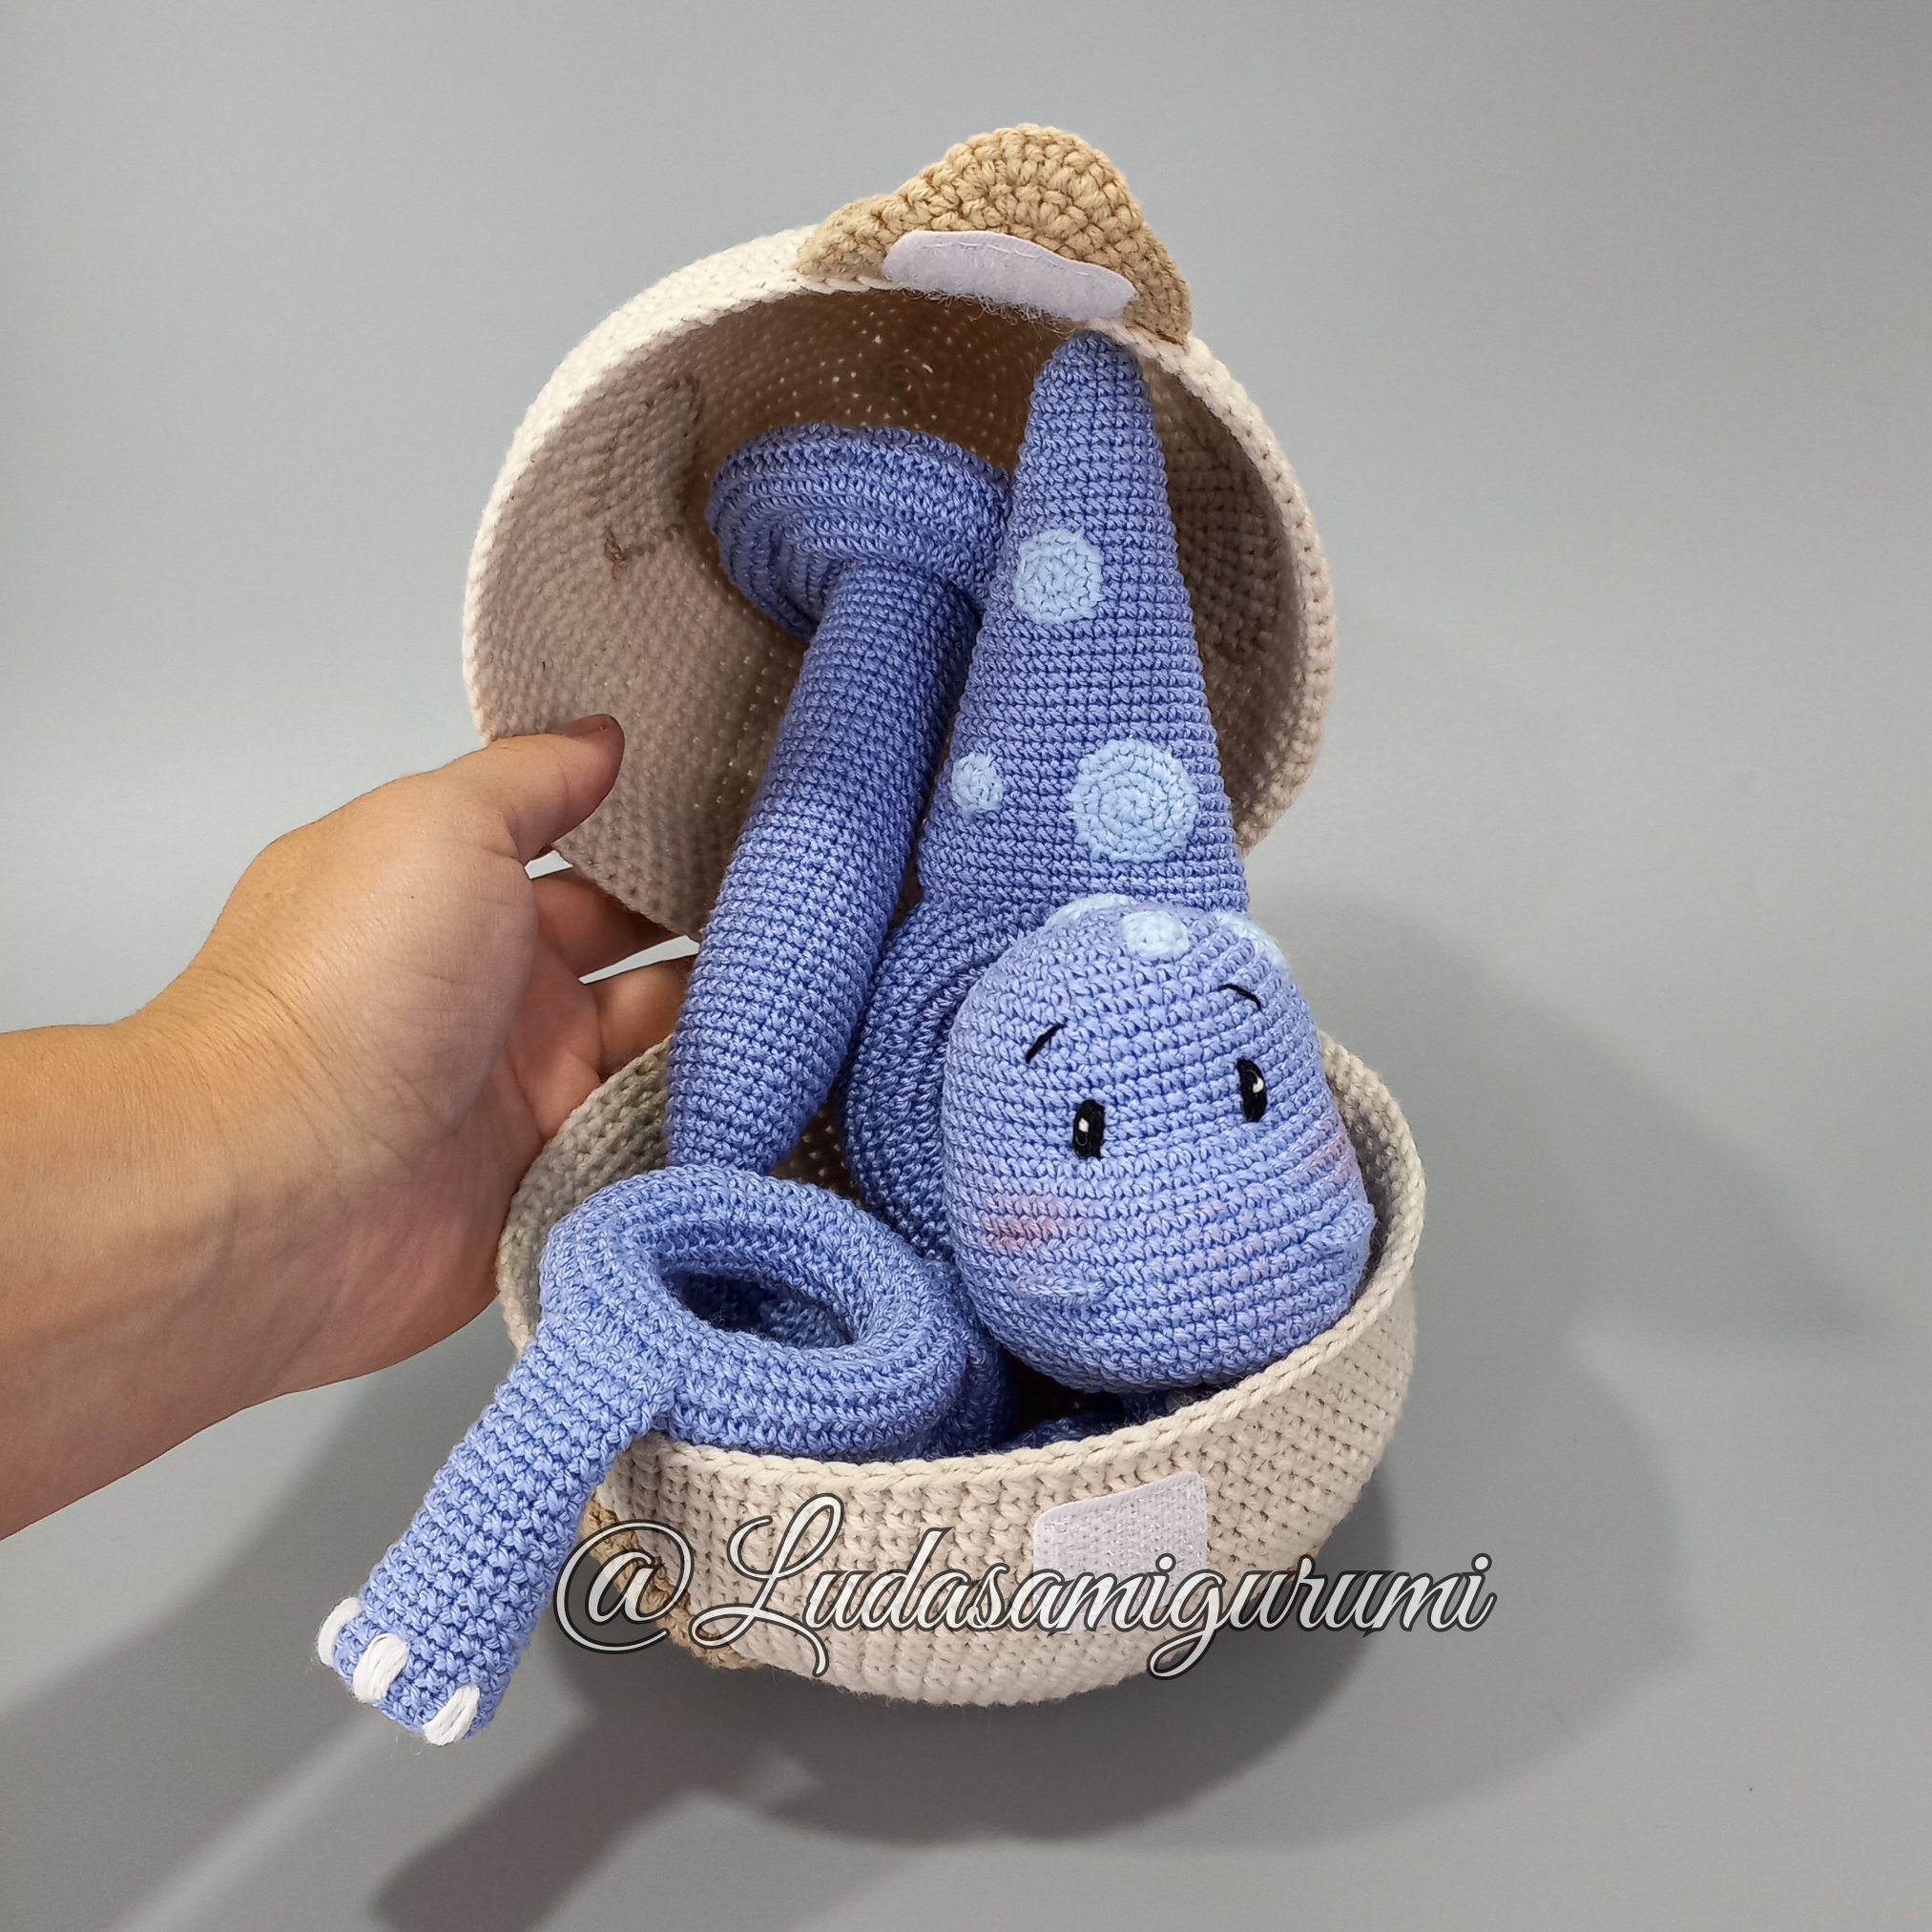 Baby Dino Stacking Toy in the Egg Shell Crochet Pattern